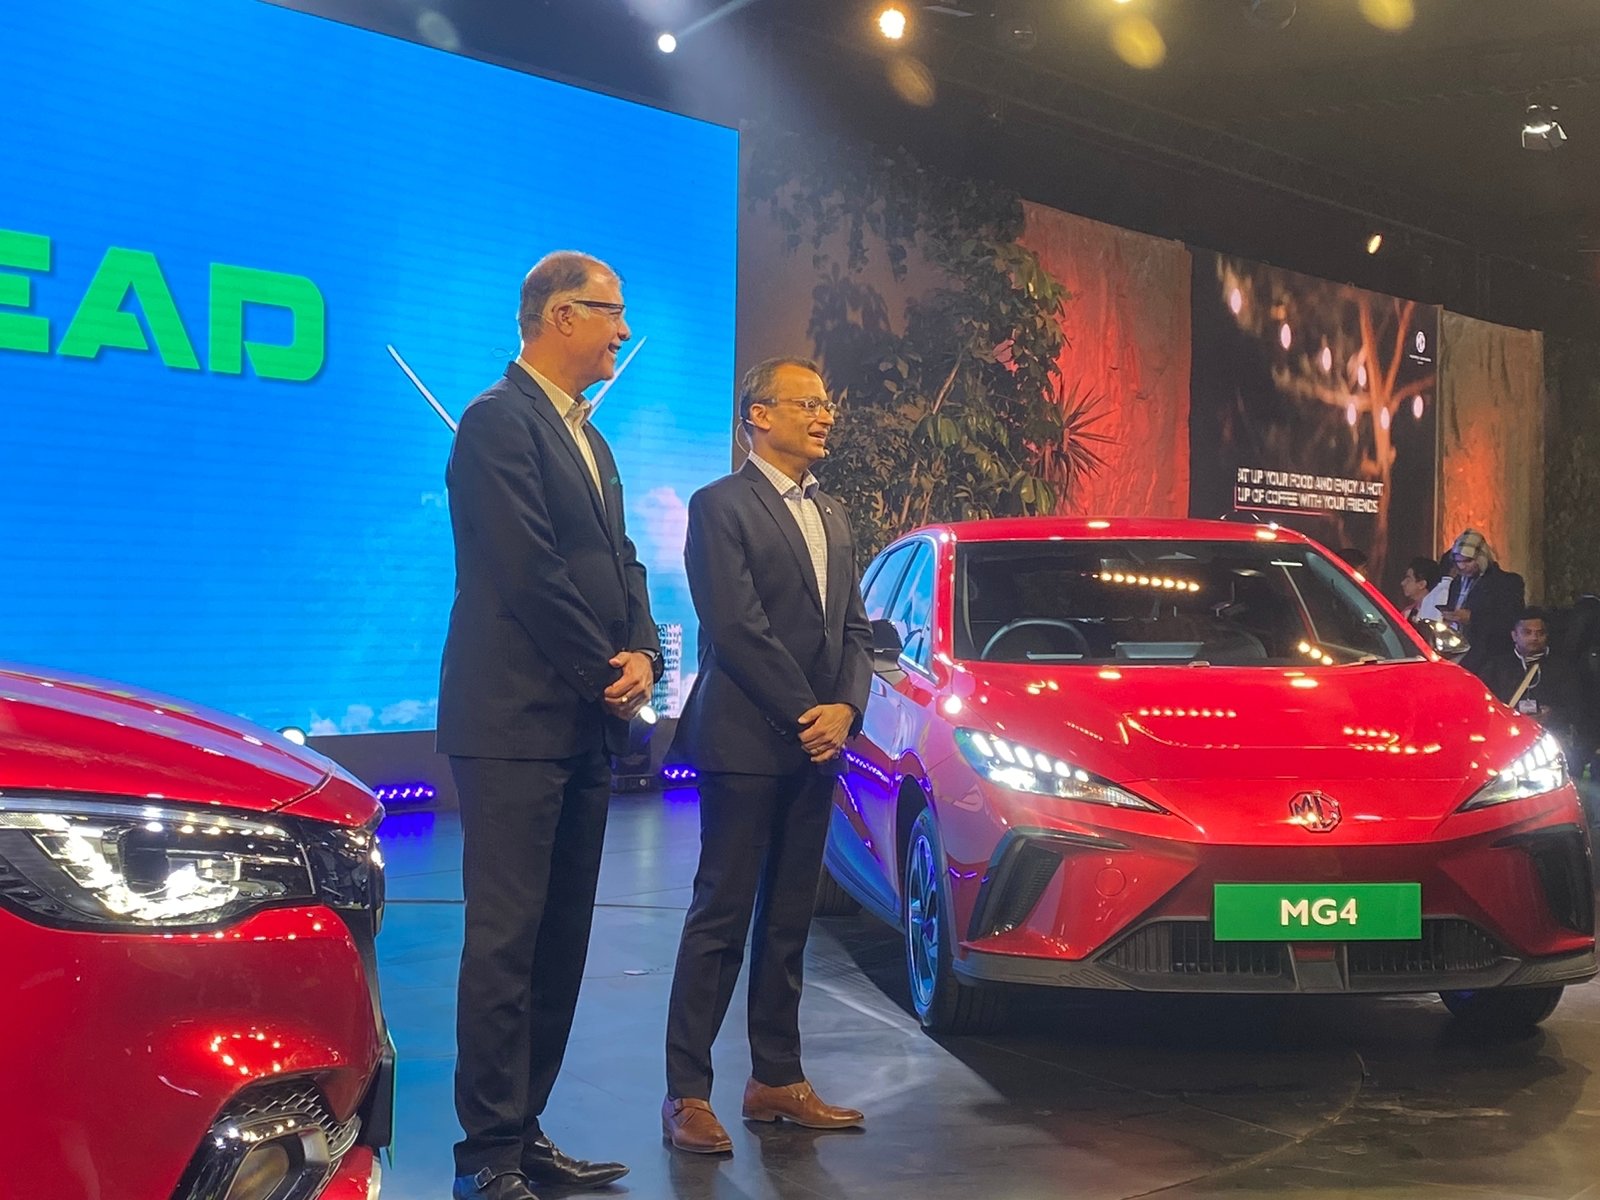 MG Showcased MG4 Electric Hatchback At Auto Expo 2023